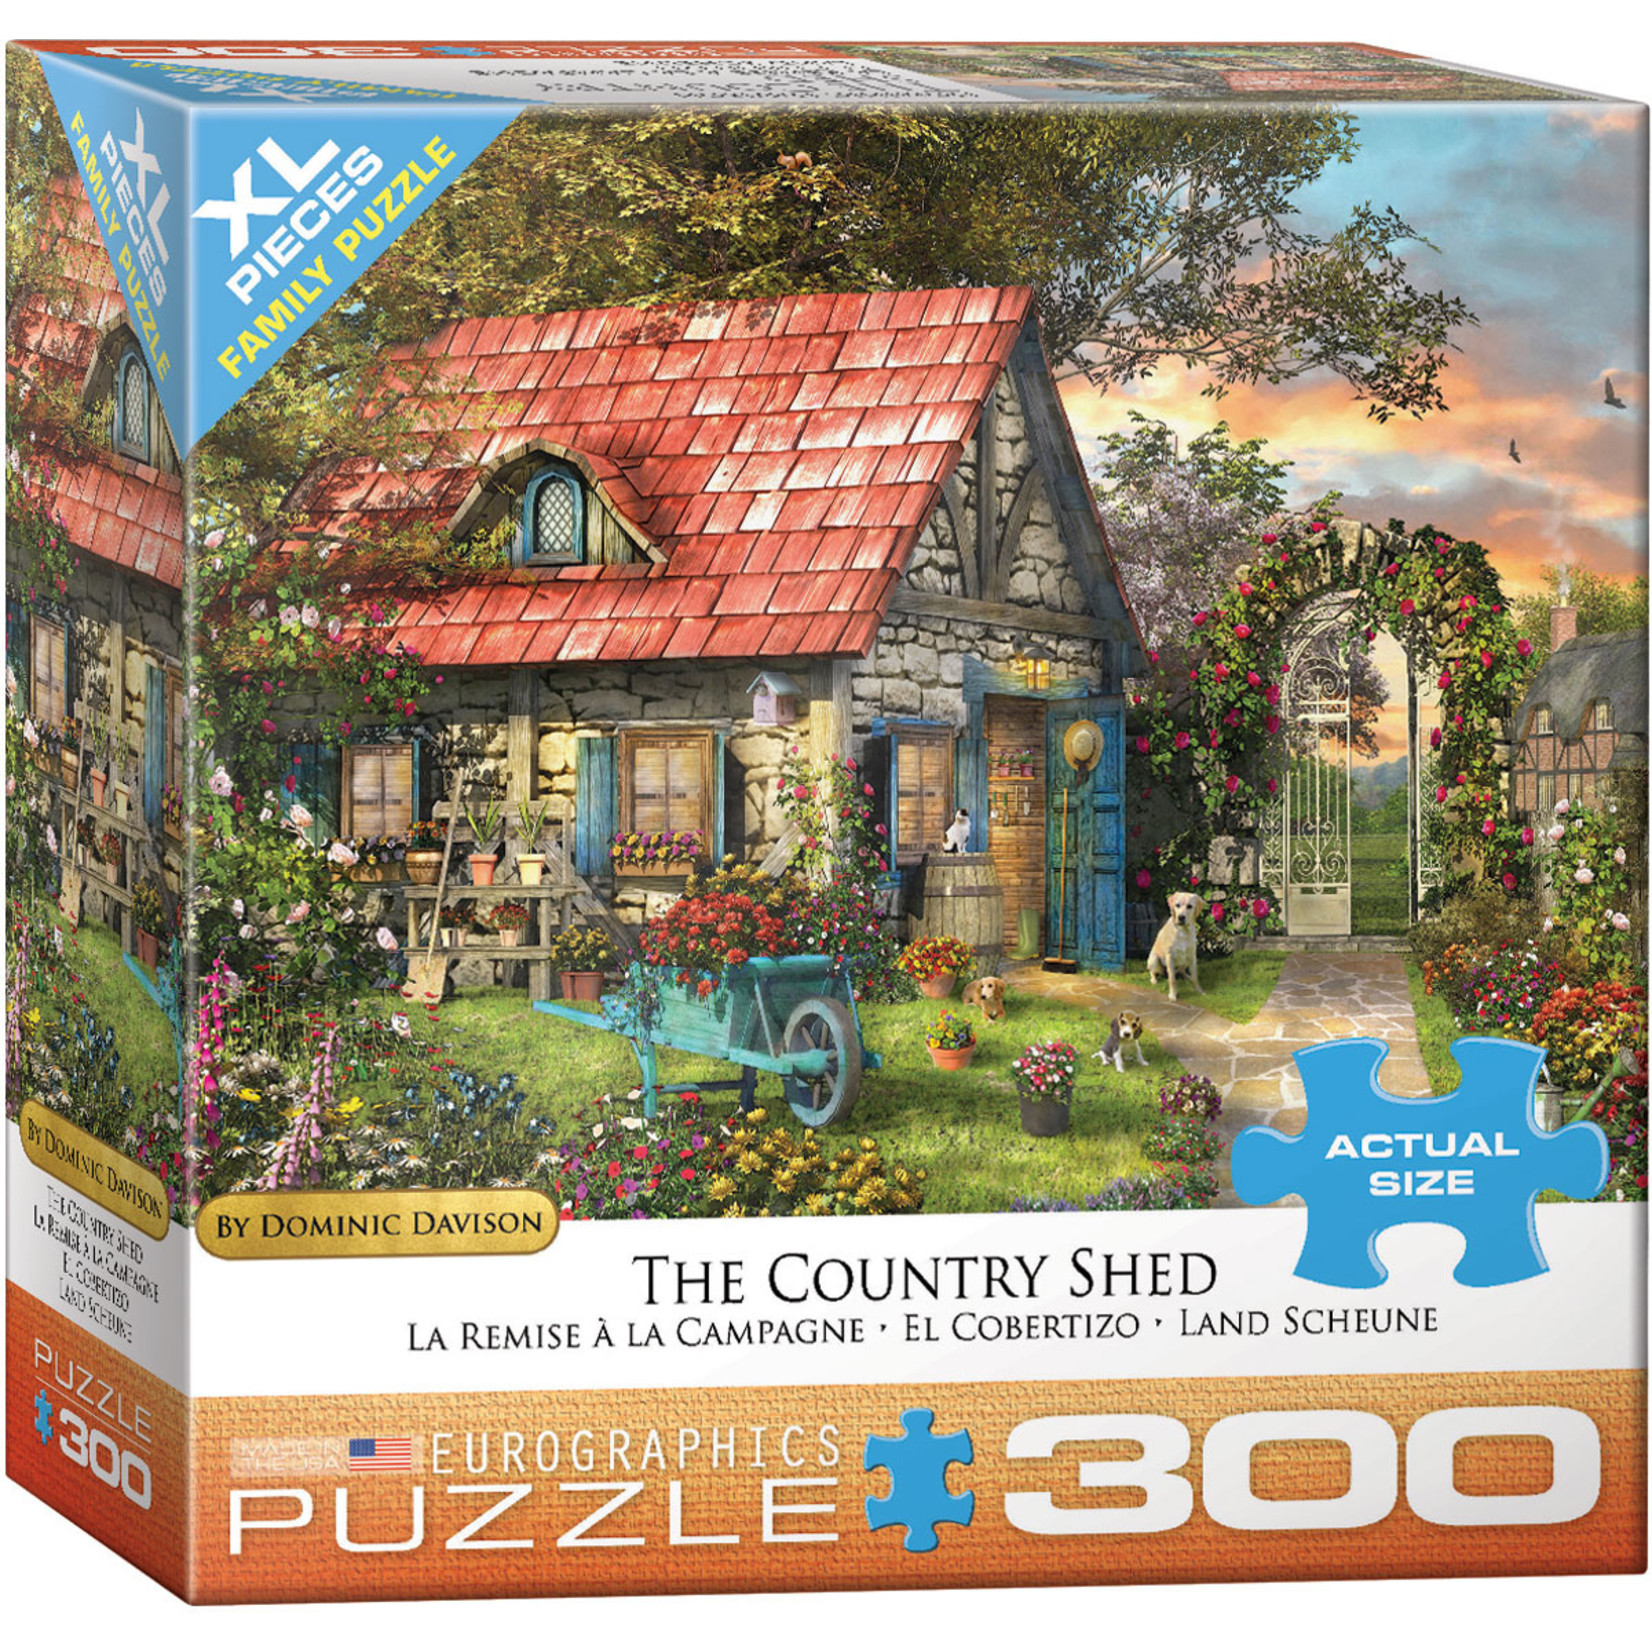 EuroGraphics Puzzles The Country Shed - Davidson 300pc